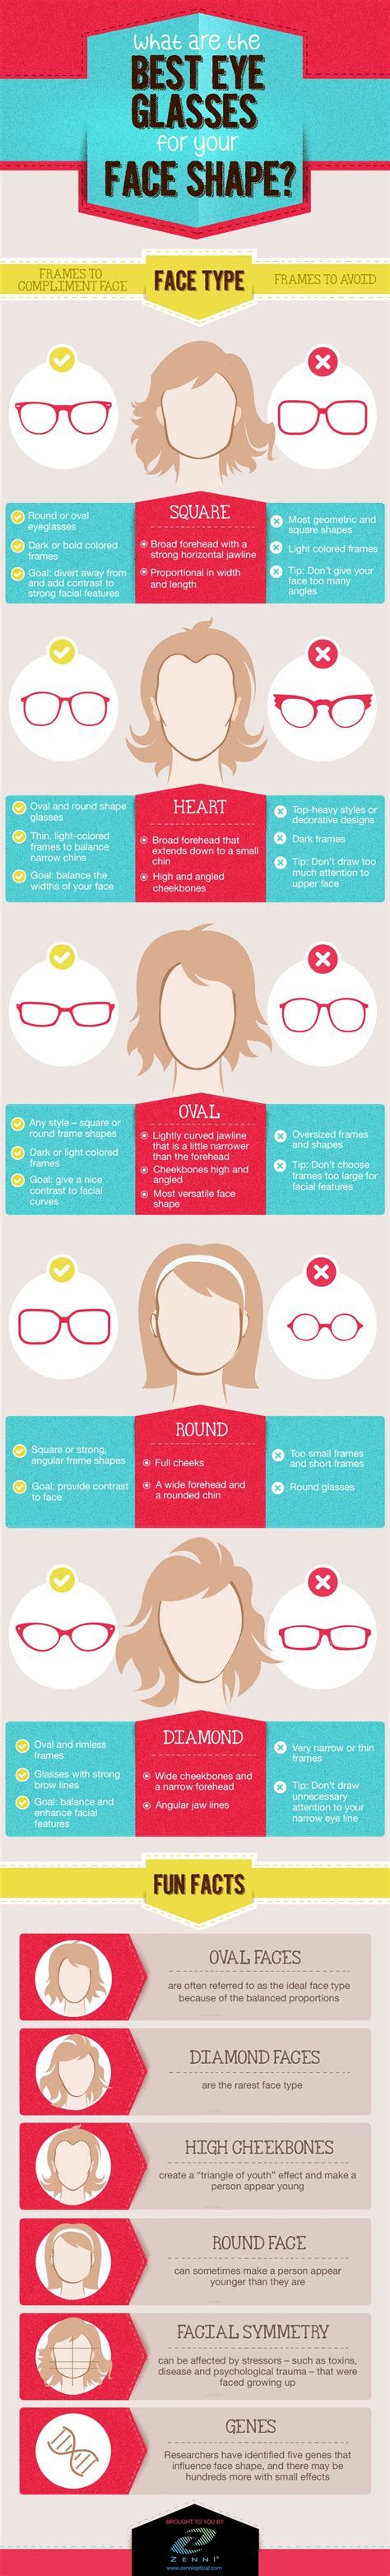 how to find the best eyeglasses for your face shape my beauty source